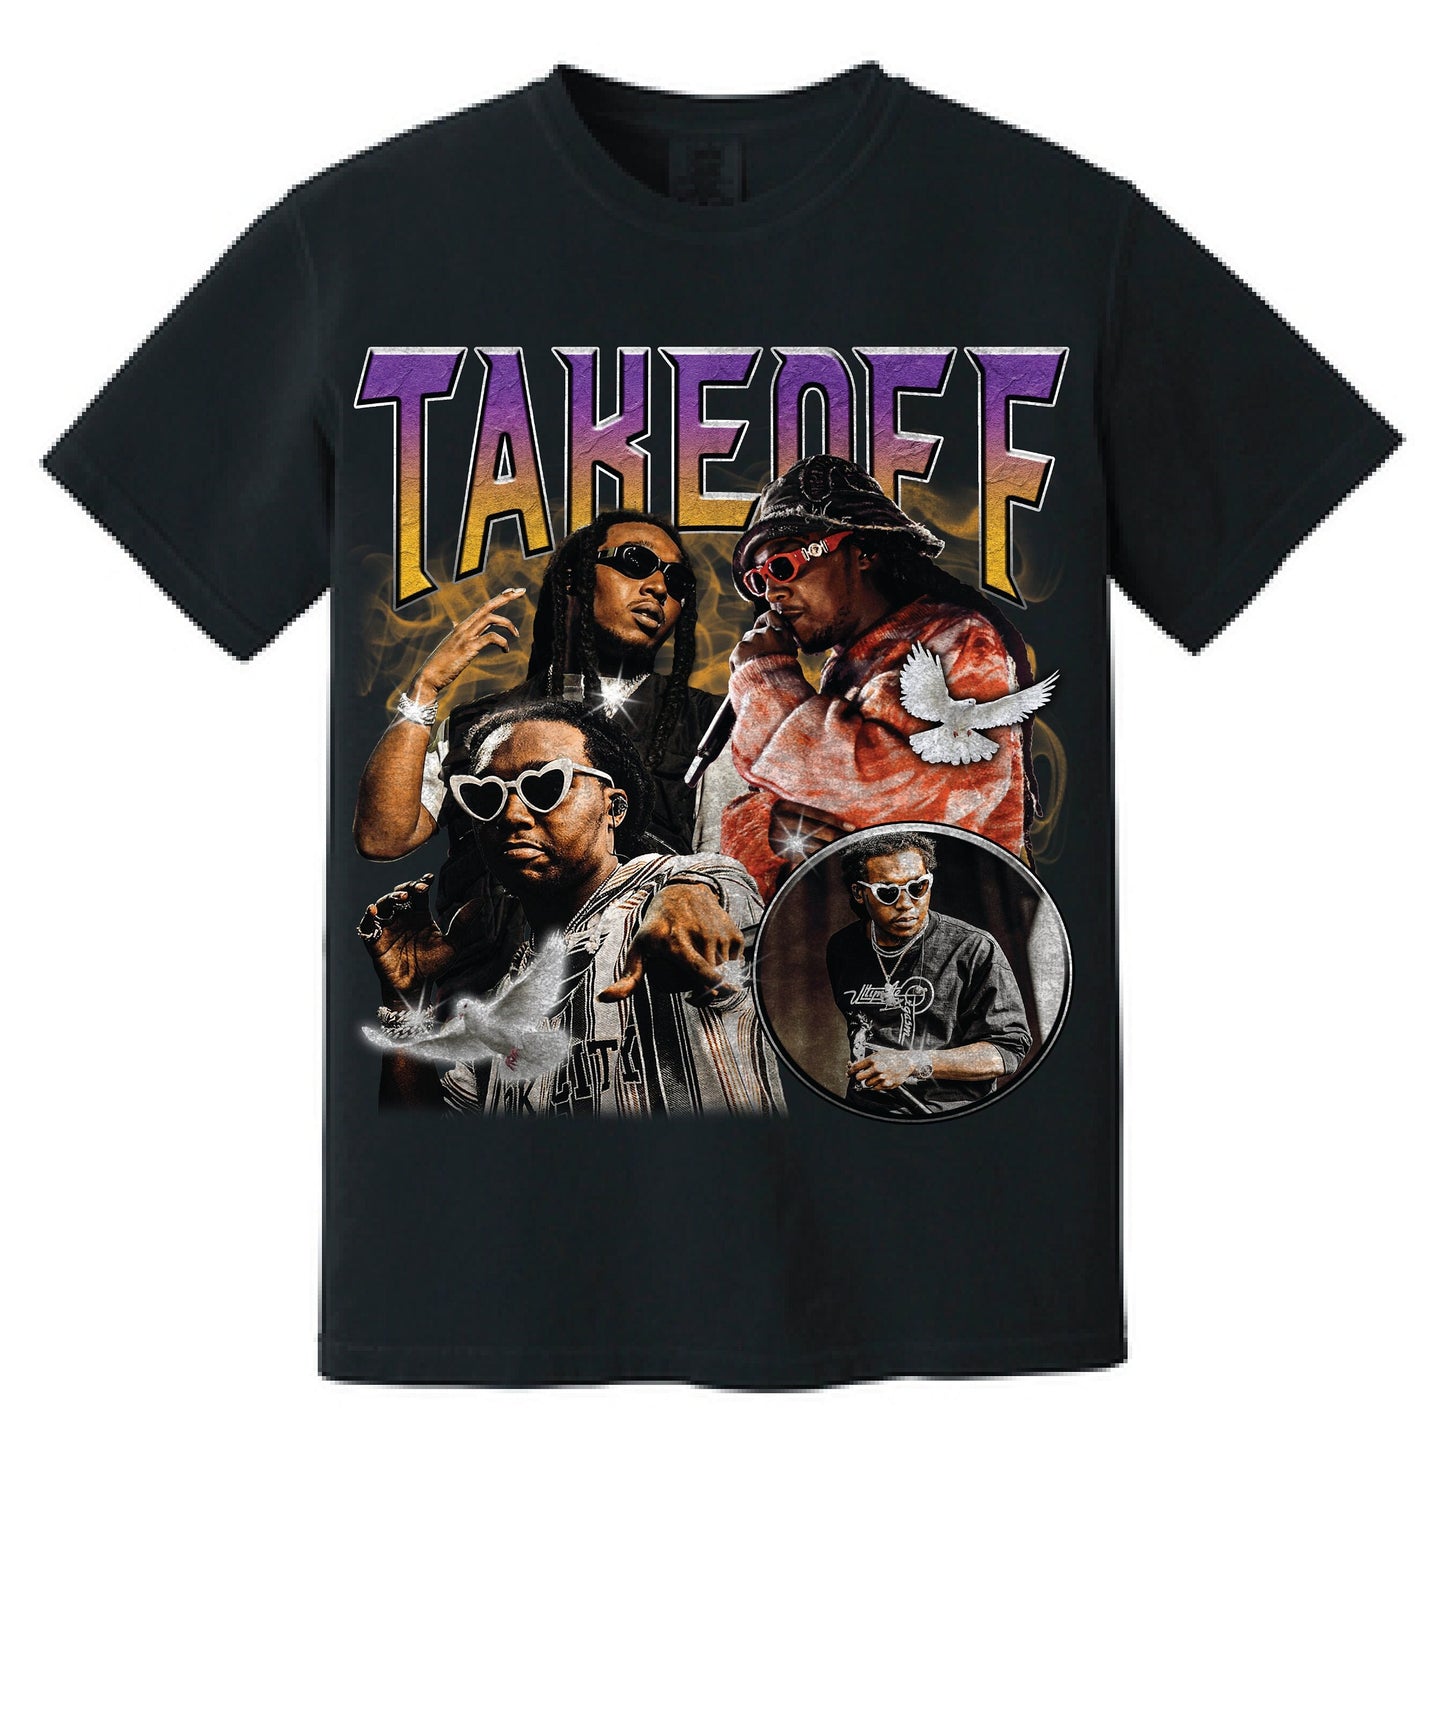 RIP Takeoff Vintage 90's Bootleg T-shirt - Tribute to a Hip-Hop Legend